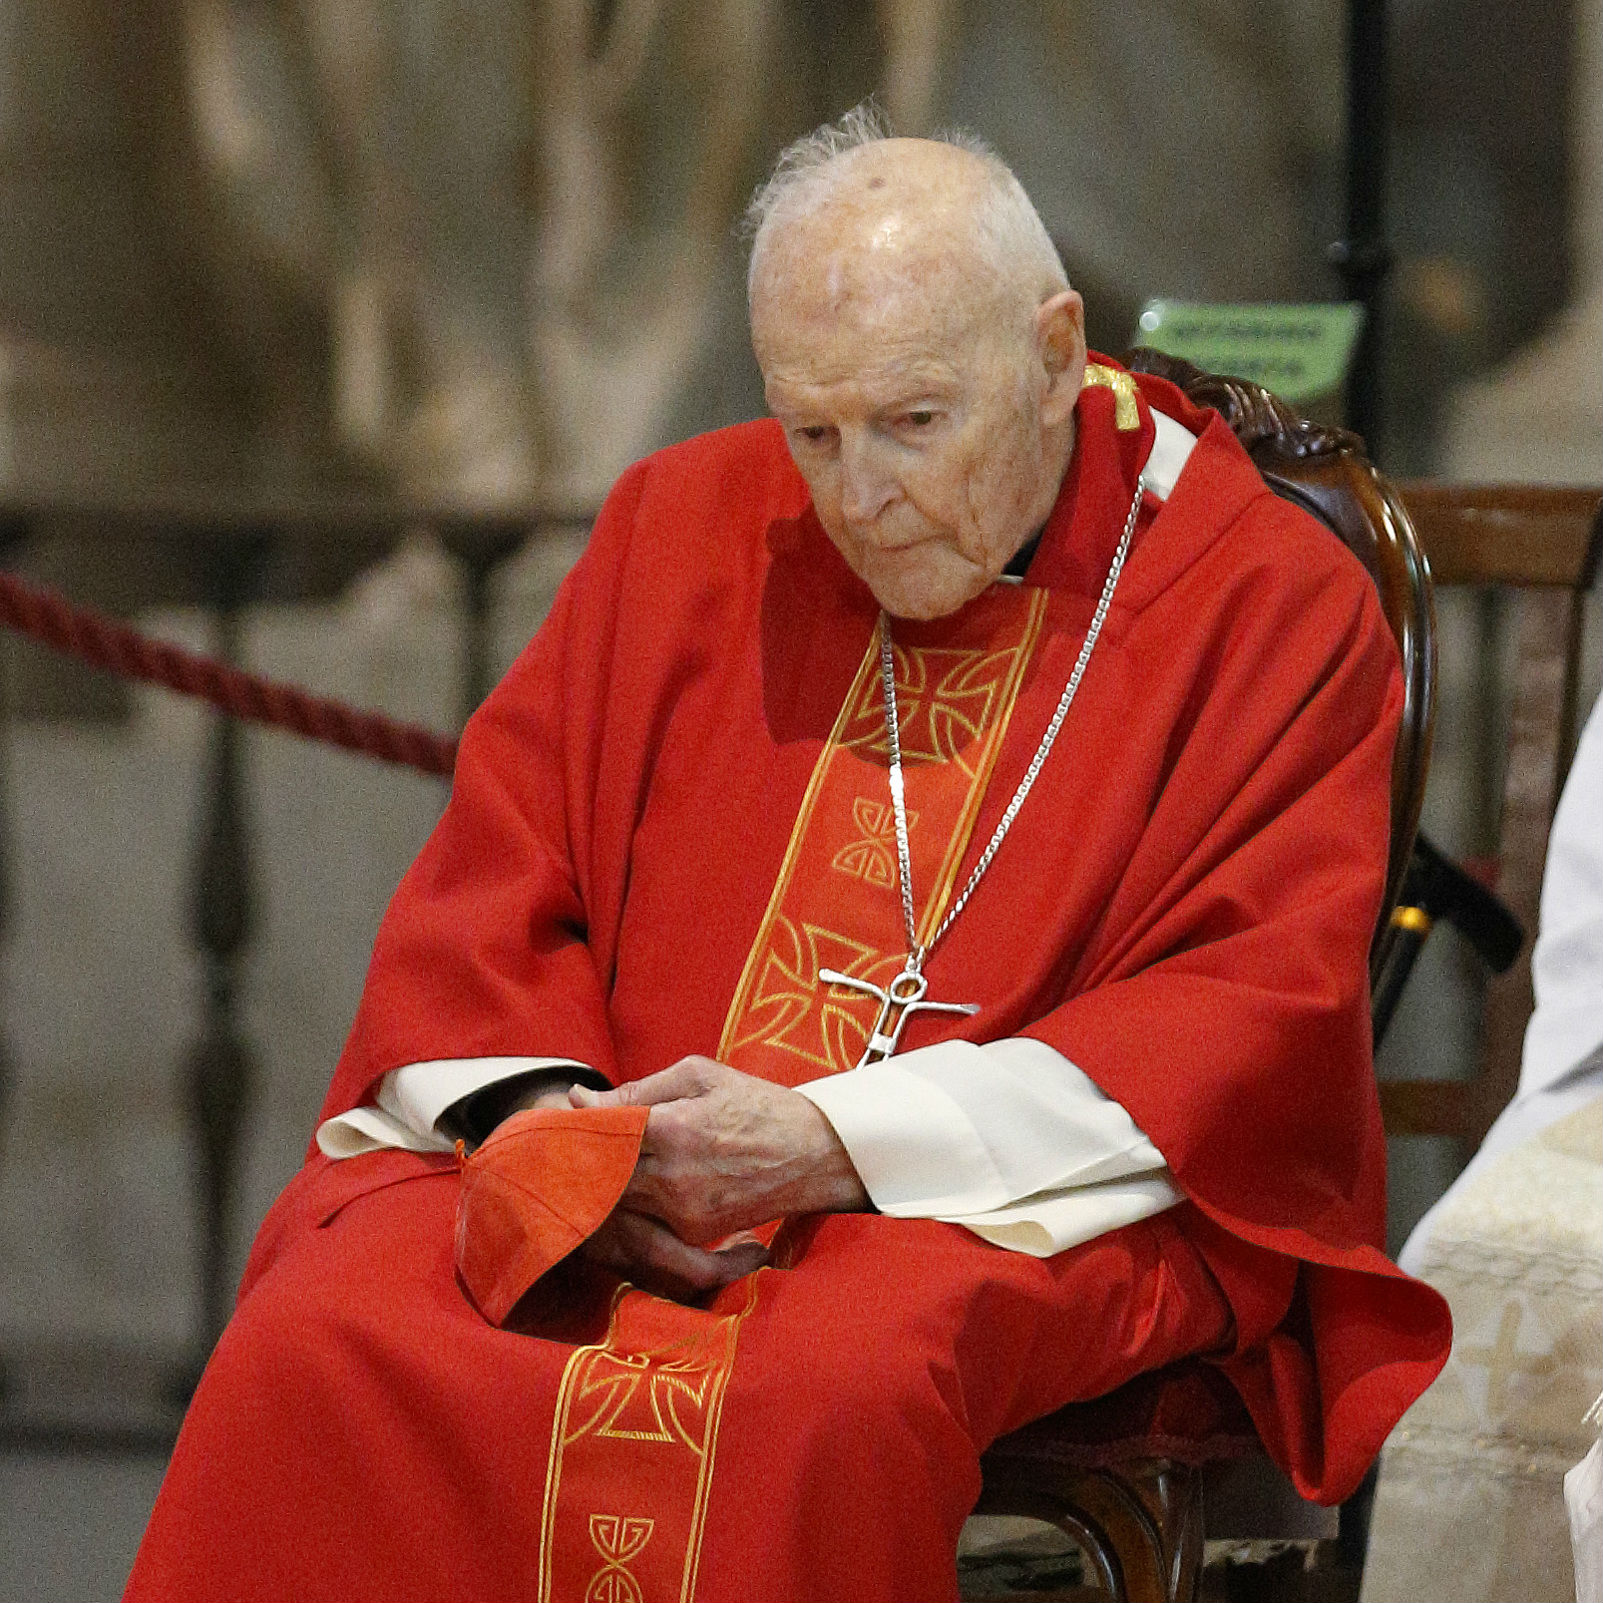 McCarrick named in list of priests 'credibly accused' of abuse